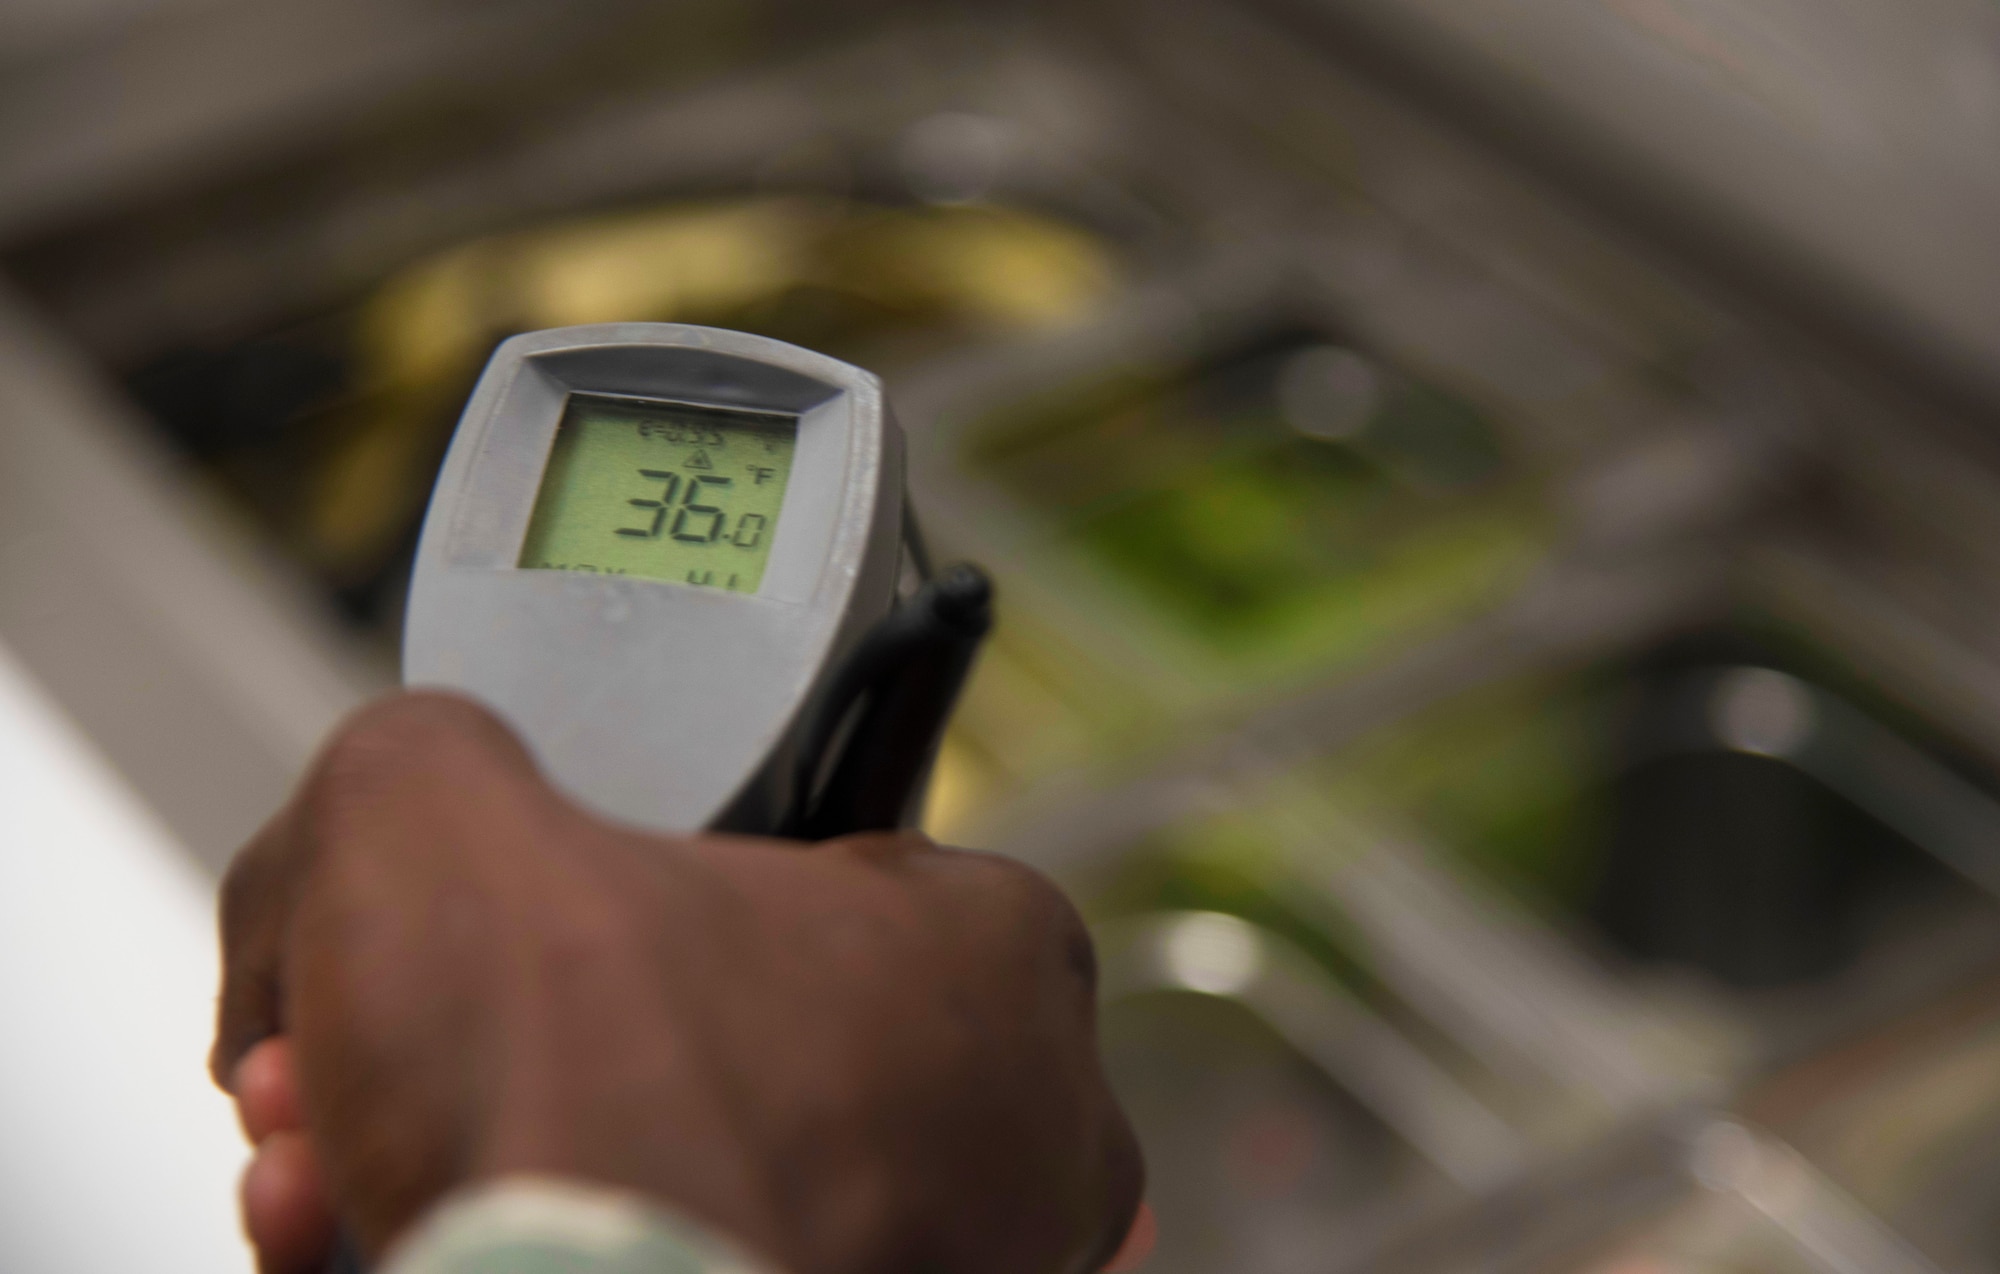 U.S. Air Force Staff Sgt. Cornelius Bransah, the NCO in charge of food safety and sanitation assigned to the 6th Aerospace Medical Squadron, uses a handheld infrared thermometer to check the temperatures of food items at MacDill Air Force Base, Fla., June 13, 2017. Bransah inspects in accordance to the Tri-Service Food Code to make sure food prepared on MacDill is at the correct temperature. (U.S. Air Force photo by Airman 1st Class Adam R. Shanks)